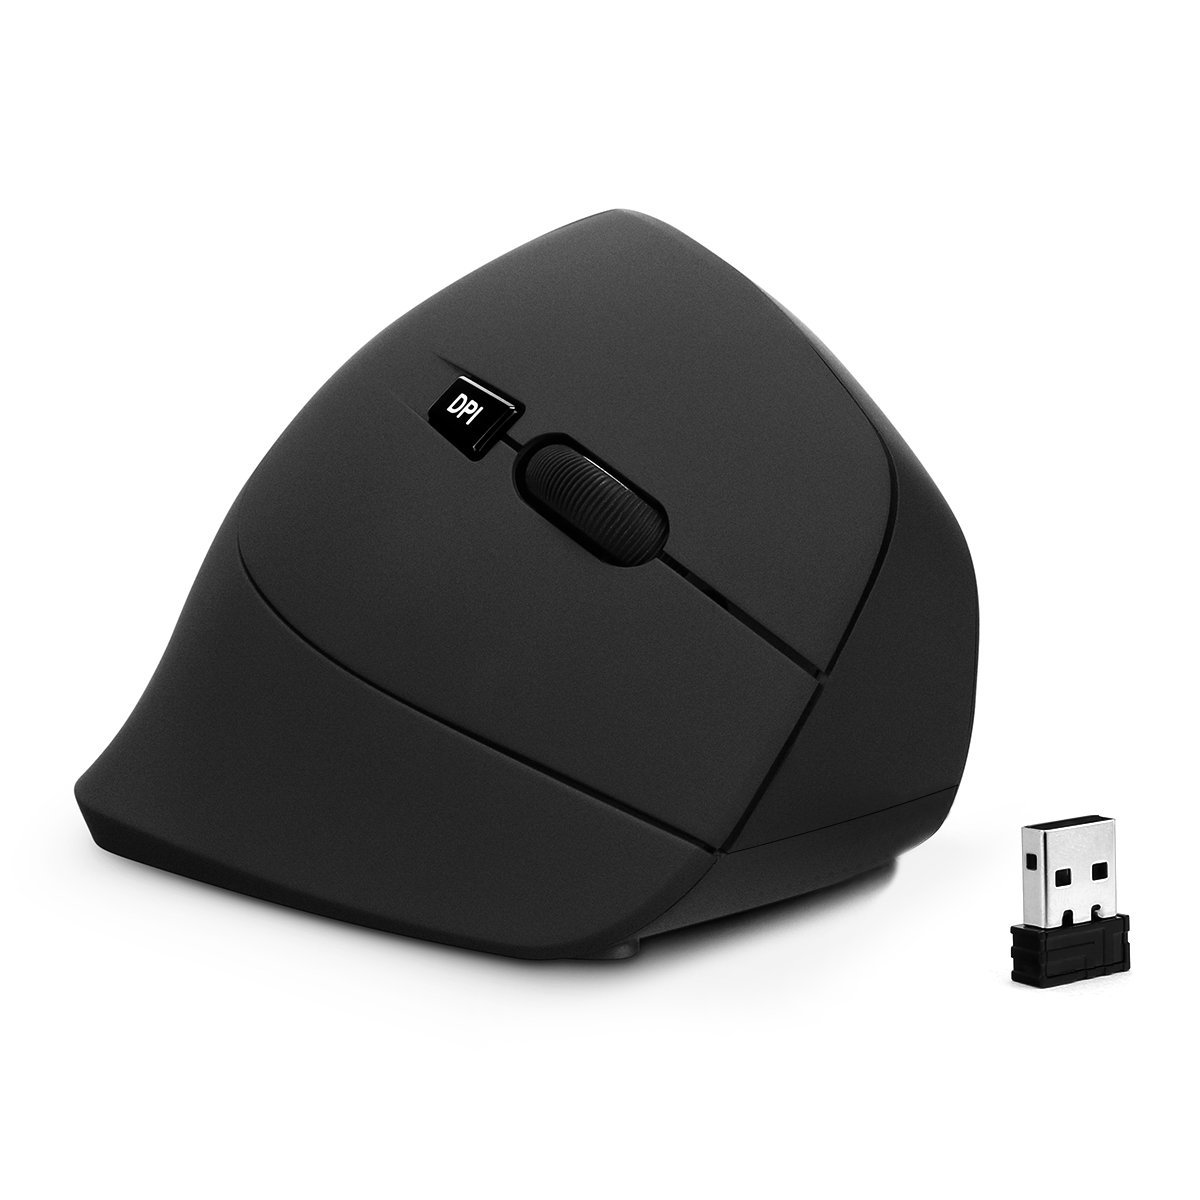 Velocifire EVM0 vertical mouse series review